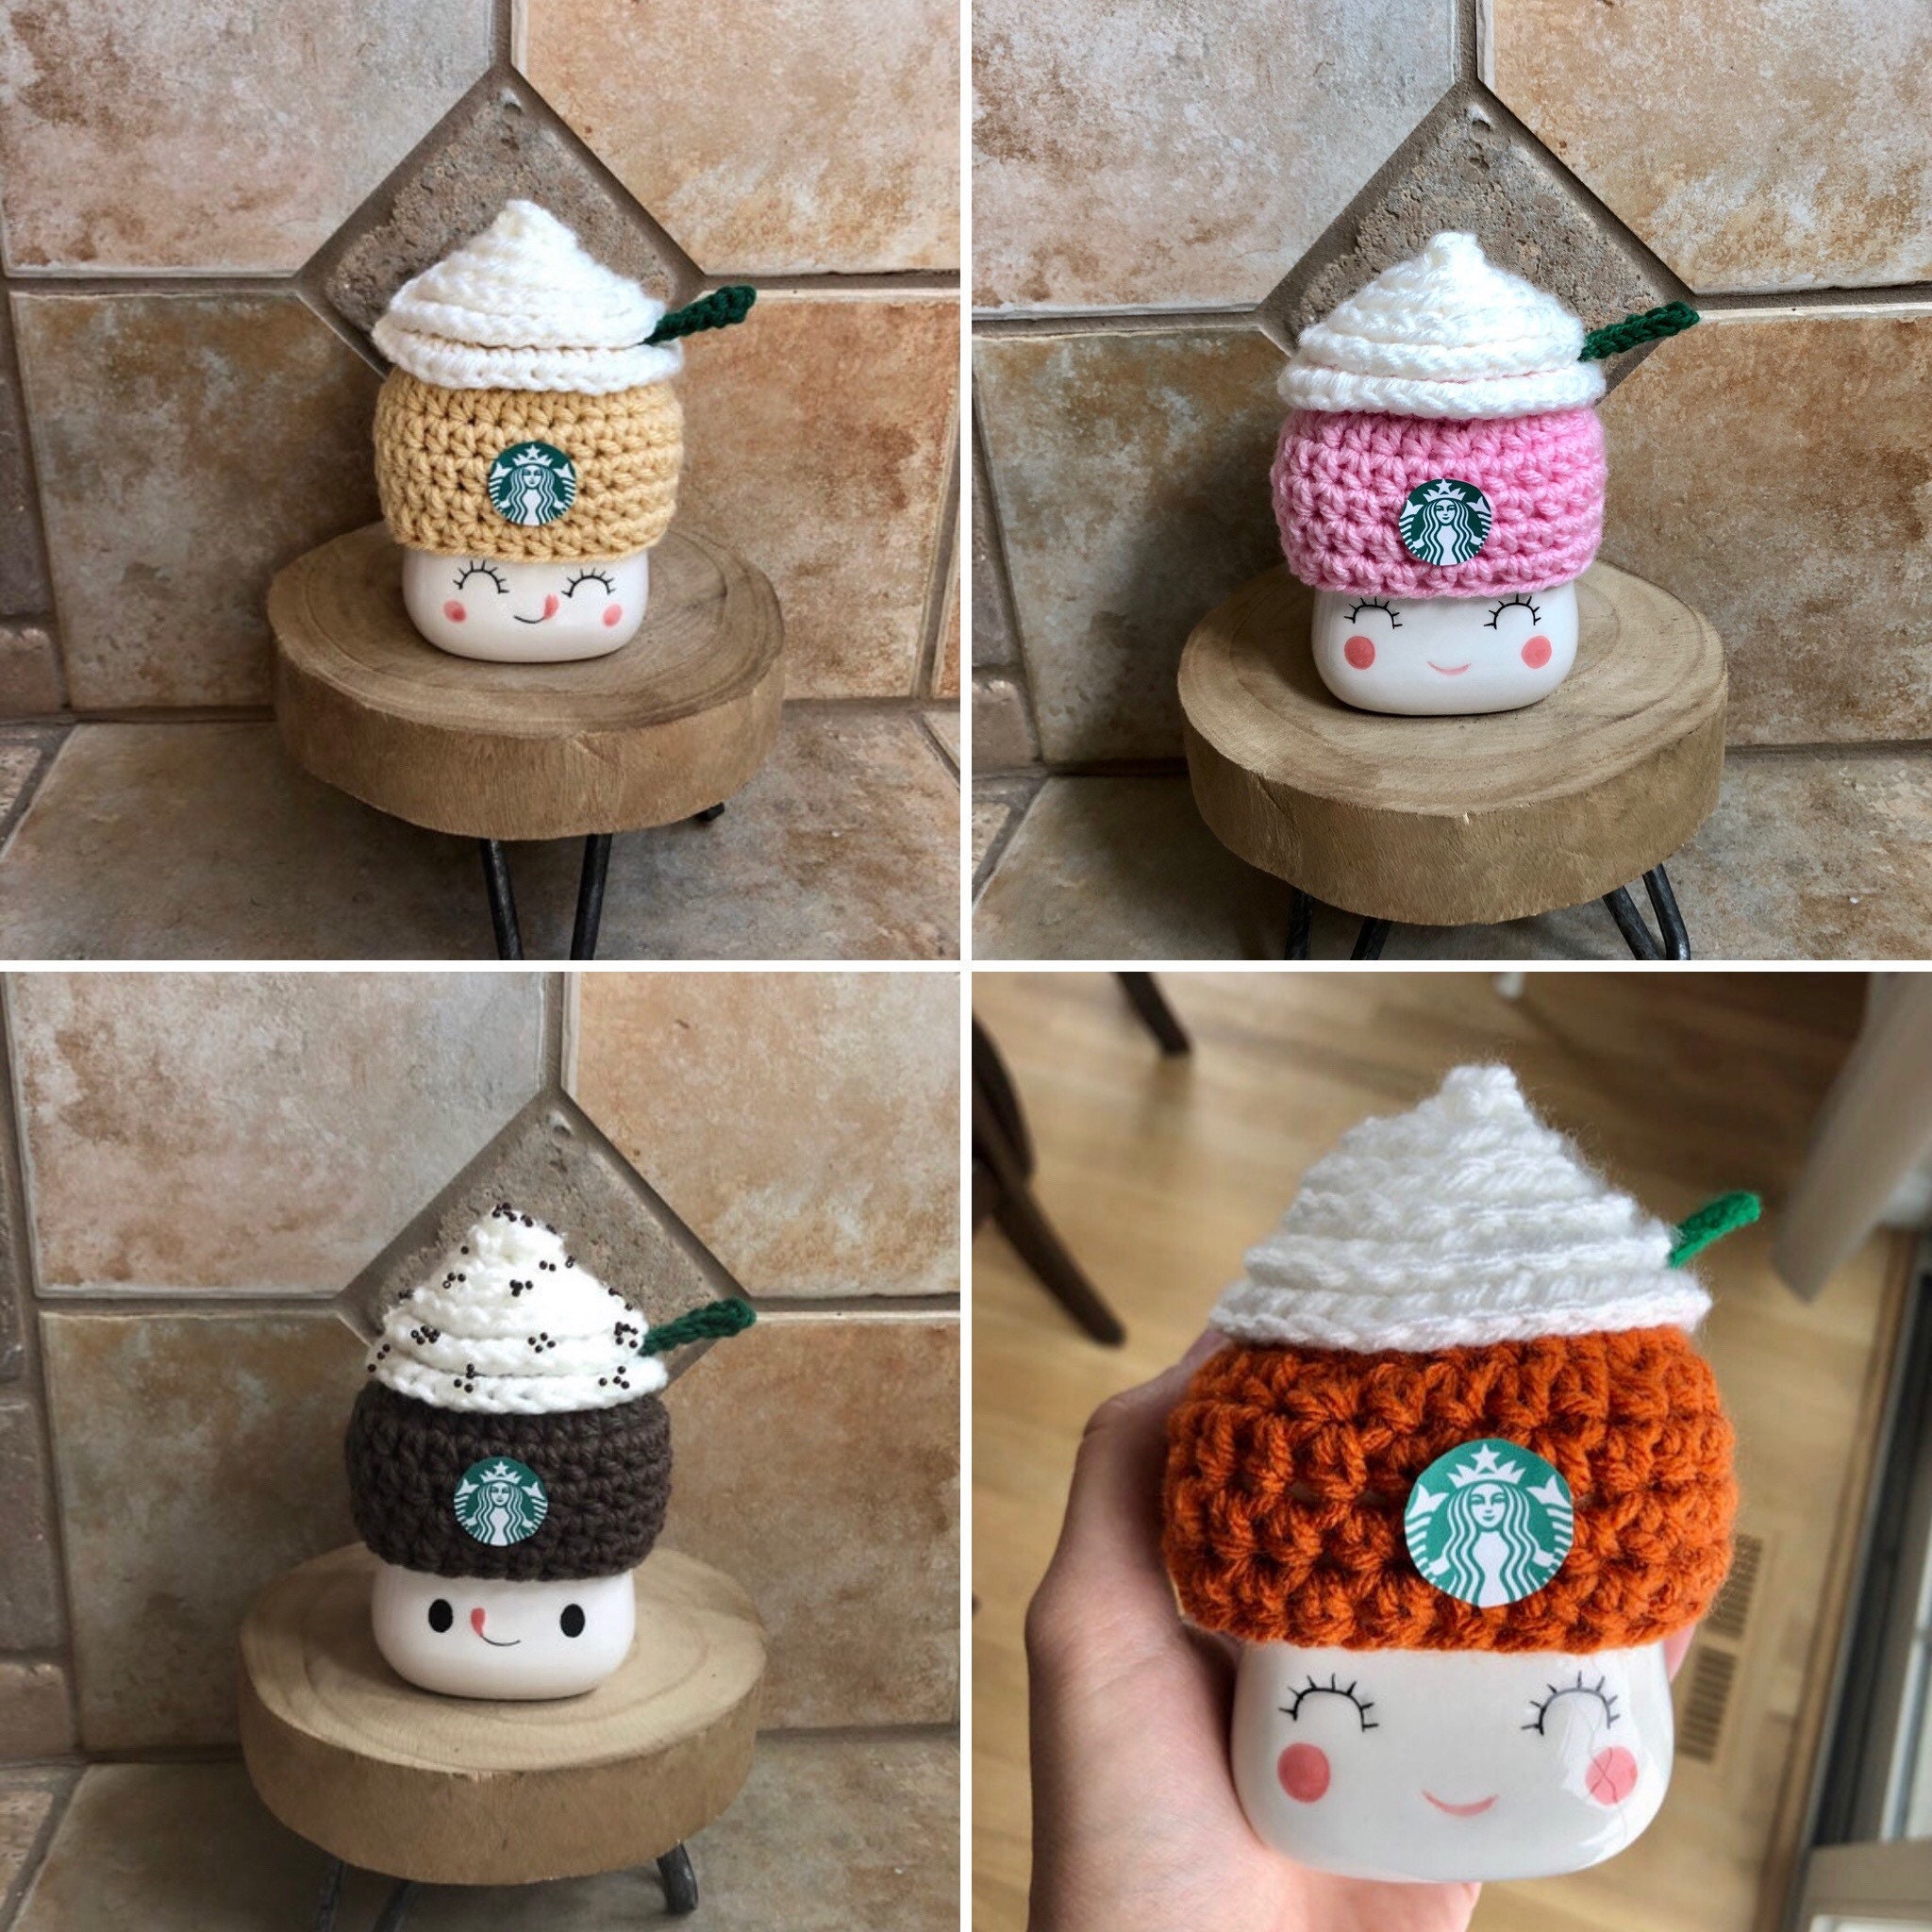 Blended Coffee Marshmallow Mug Hat | Rae Dunn Themed Tiered Tray Decor Starbucks Frappuccino